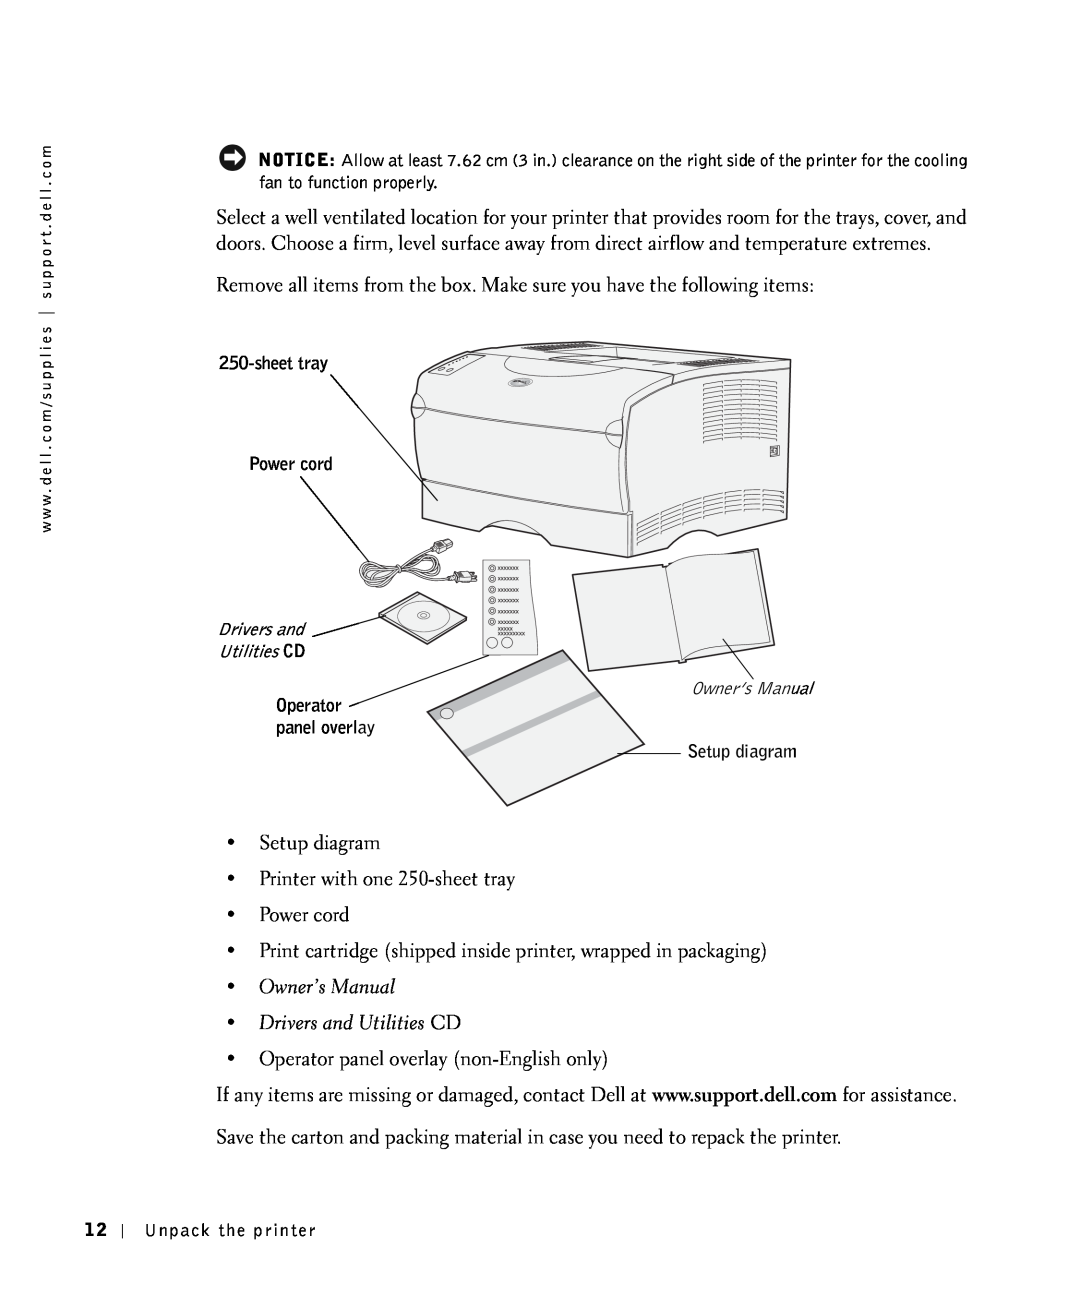 Dell S2500 Owner’s Manual Drivers and Utilities CD, Remove all items from the box. Make sure you have the following items 